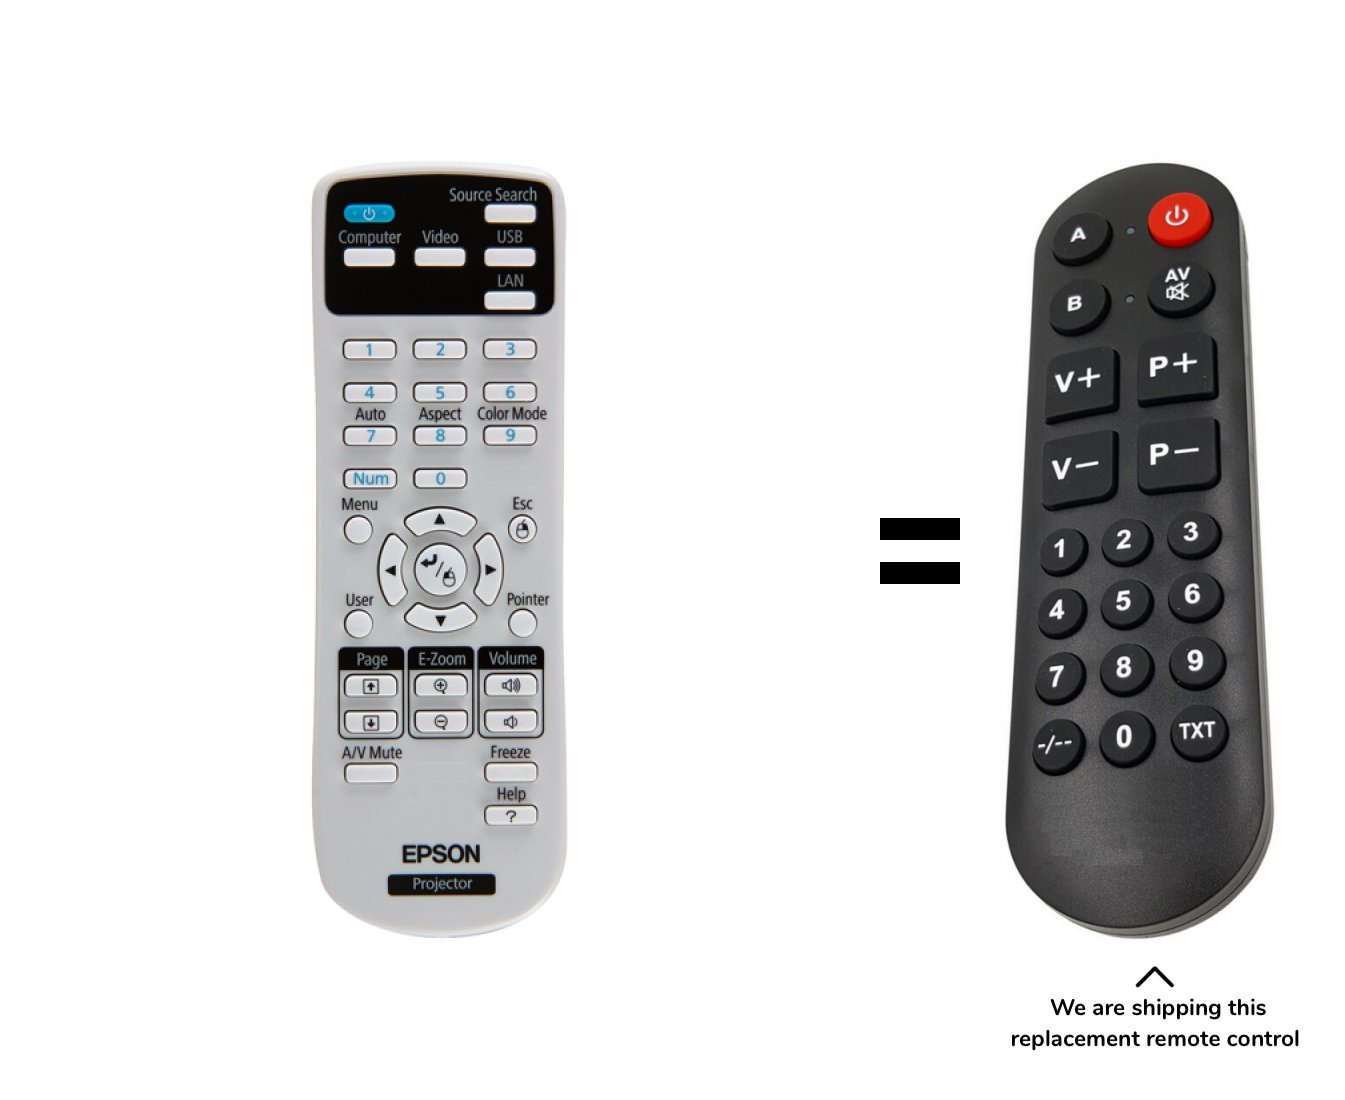 Epson EH-TW490, EH-TW410 remote control for seniors for 11.9 € TV Epson 